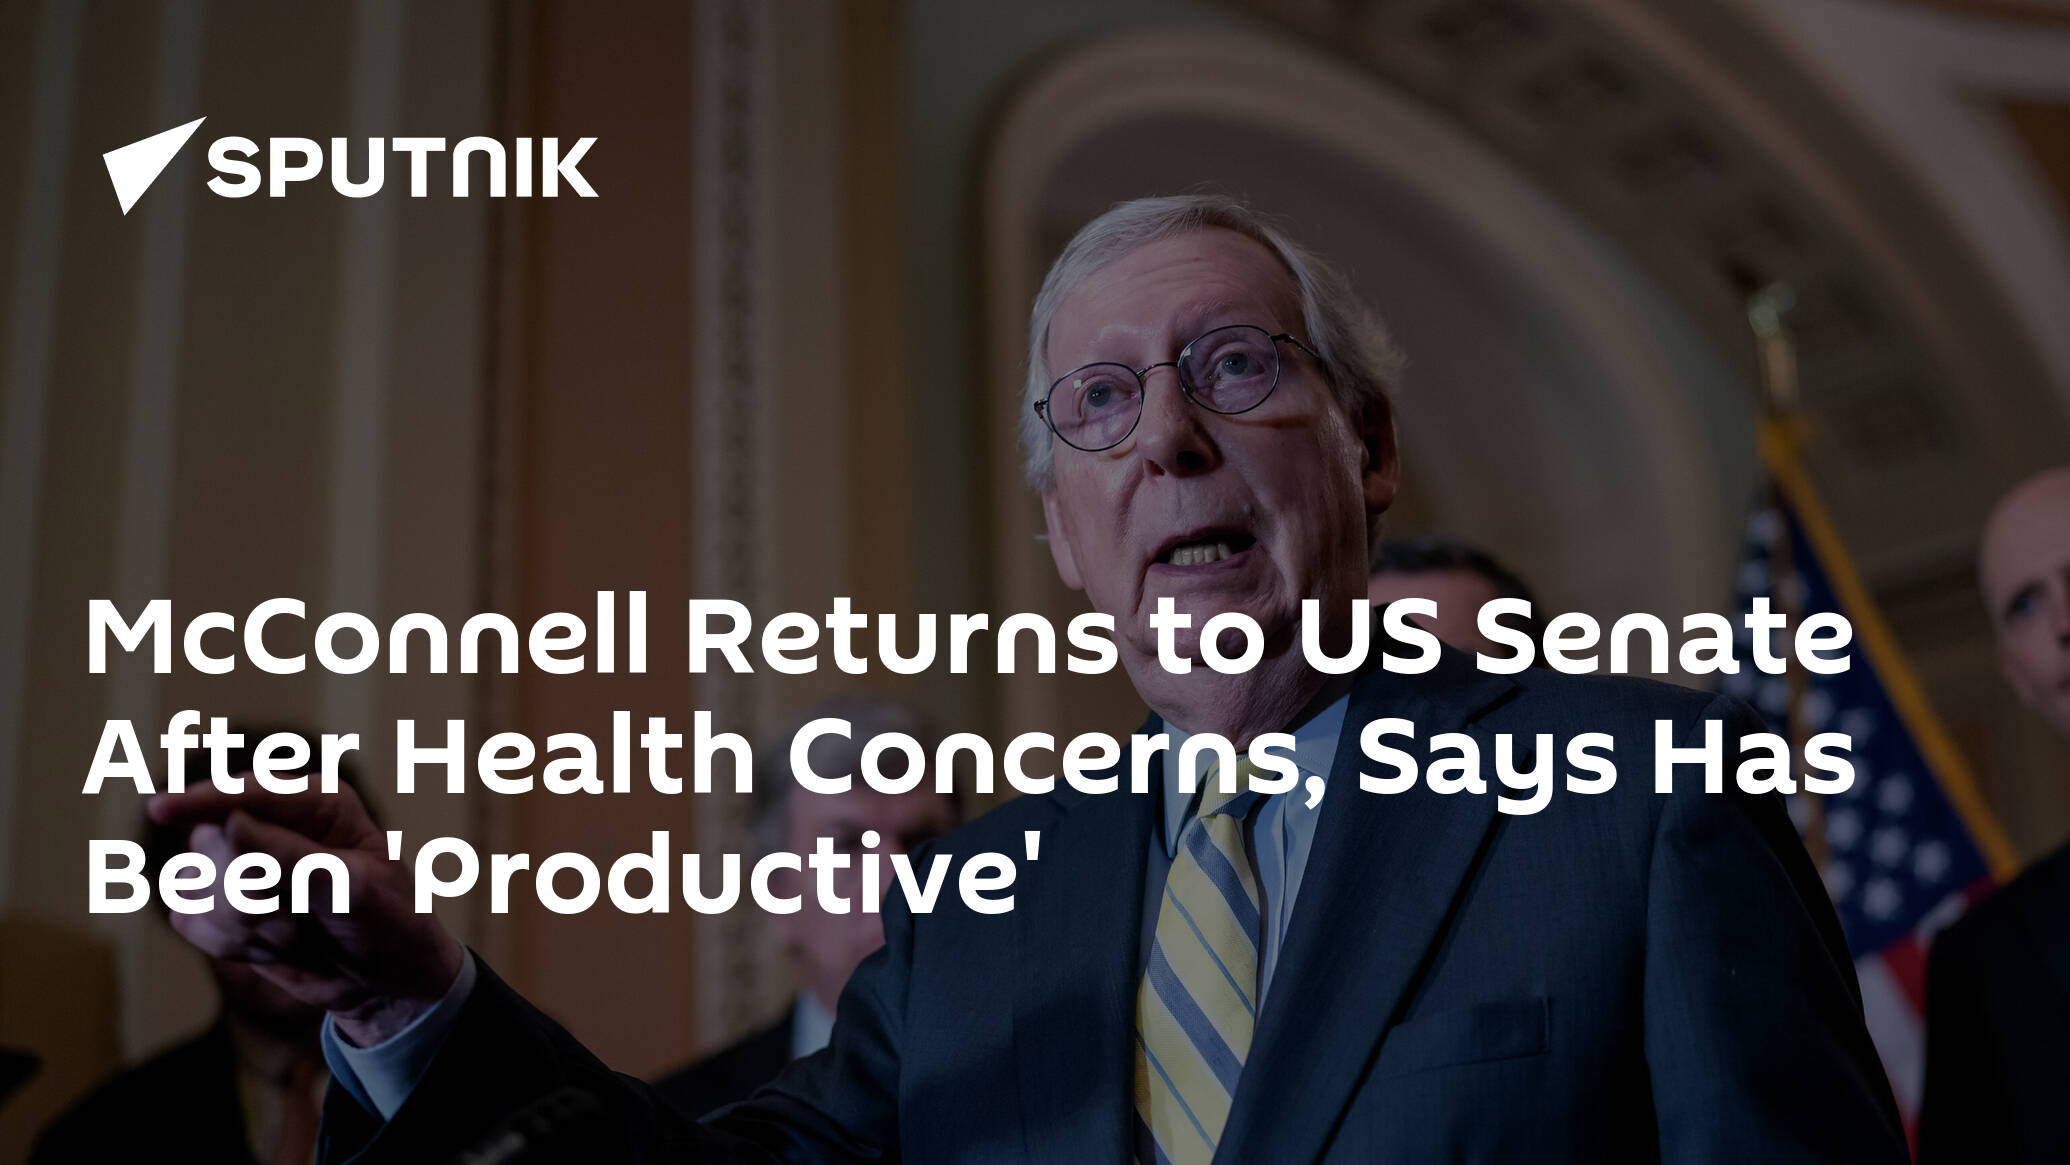 McConnell Returns to US Senate After Health Concerns, Says Has Been 'Productive'